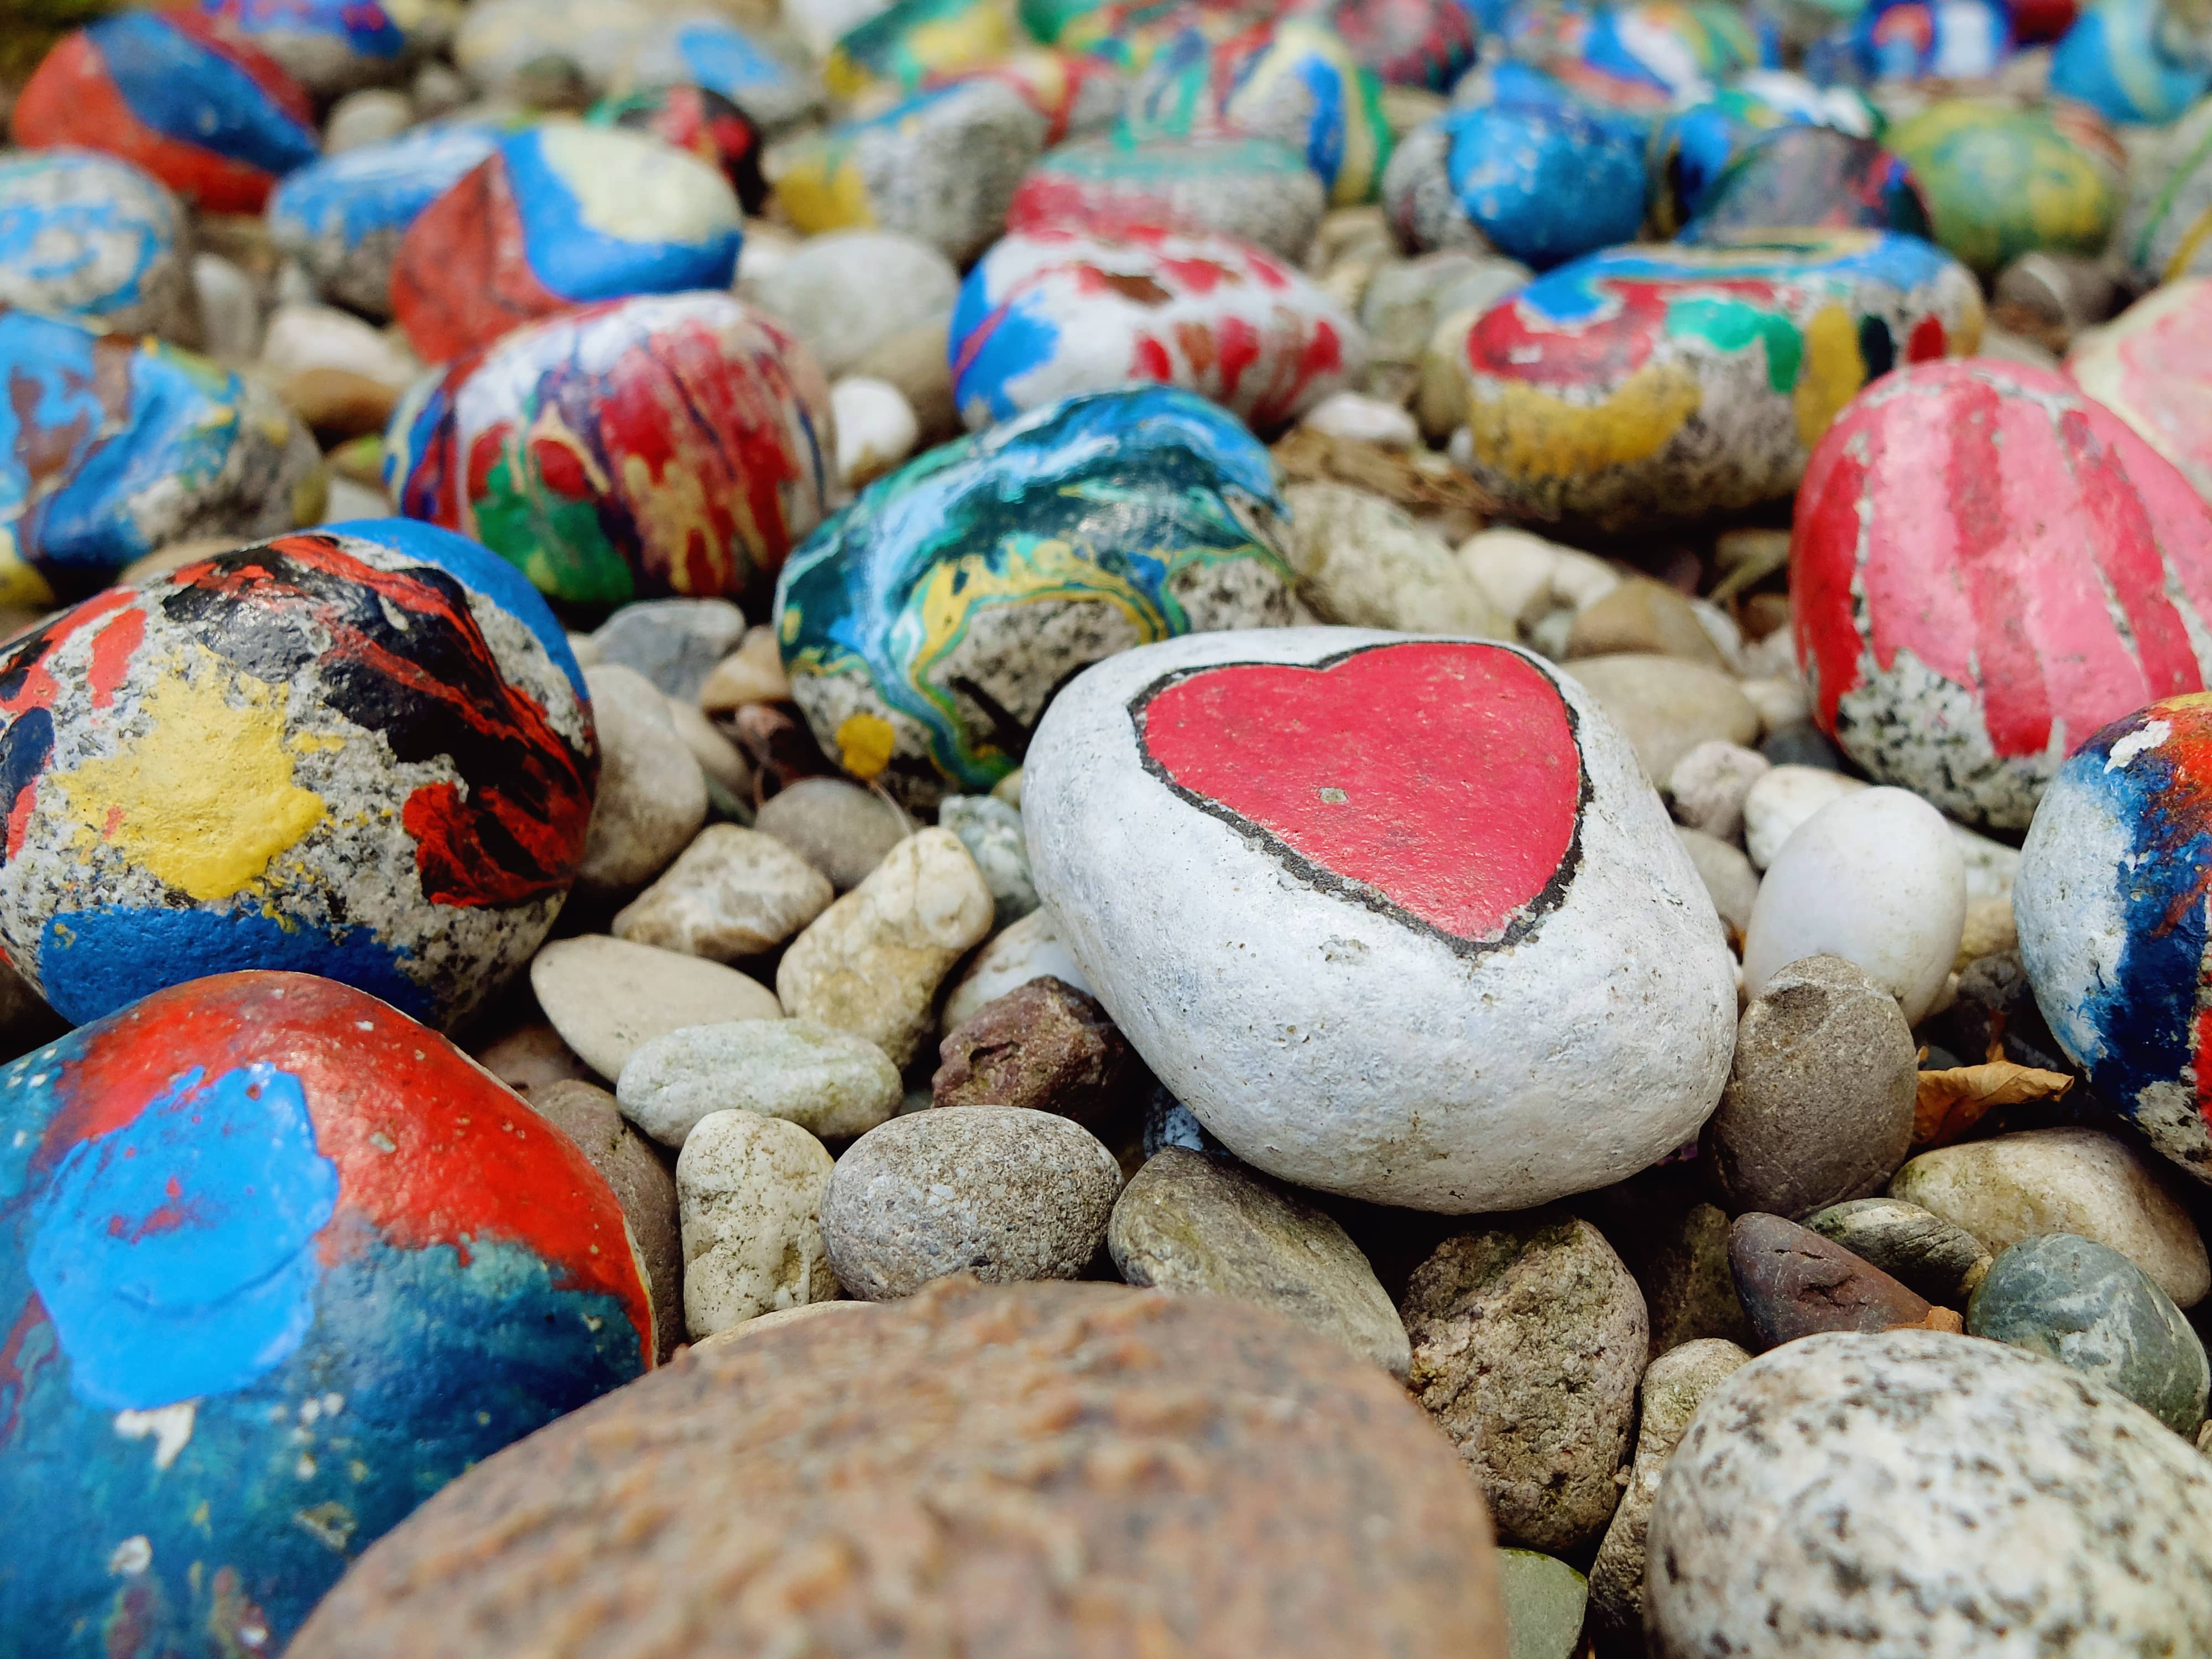 painted-rock-with-a-heart-on-display-in-a-garden-2021-10-16-23-39-10-utc